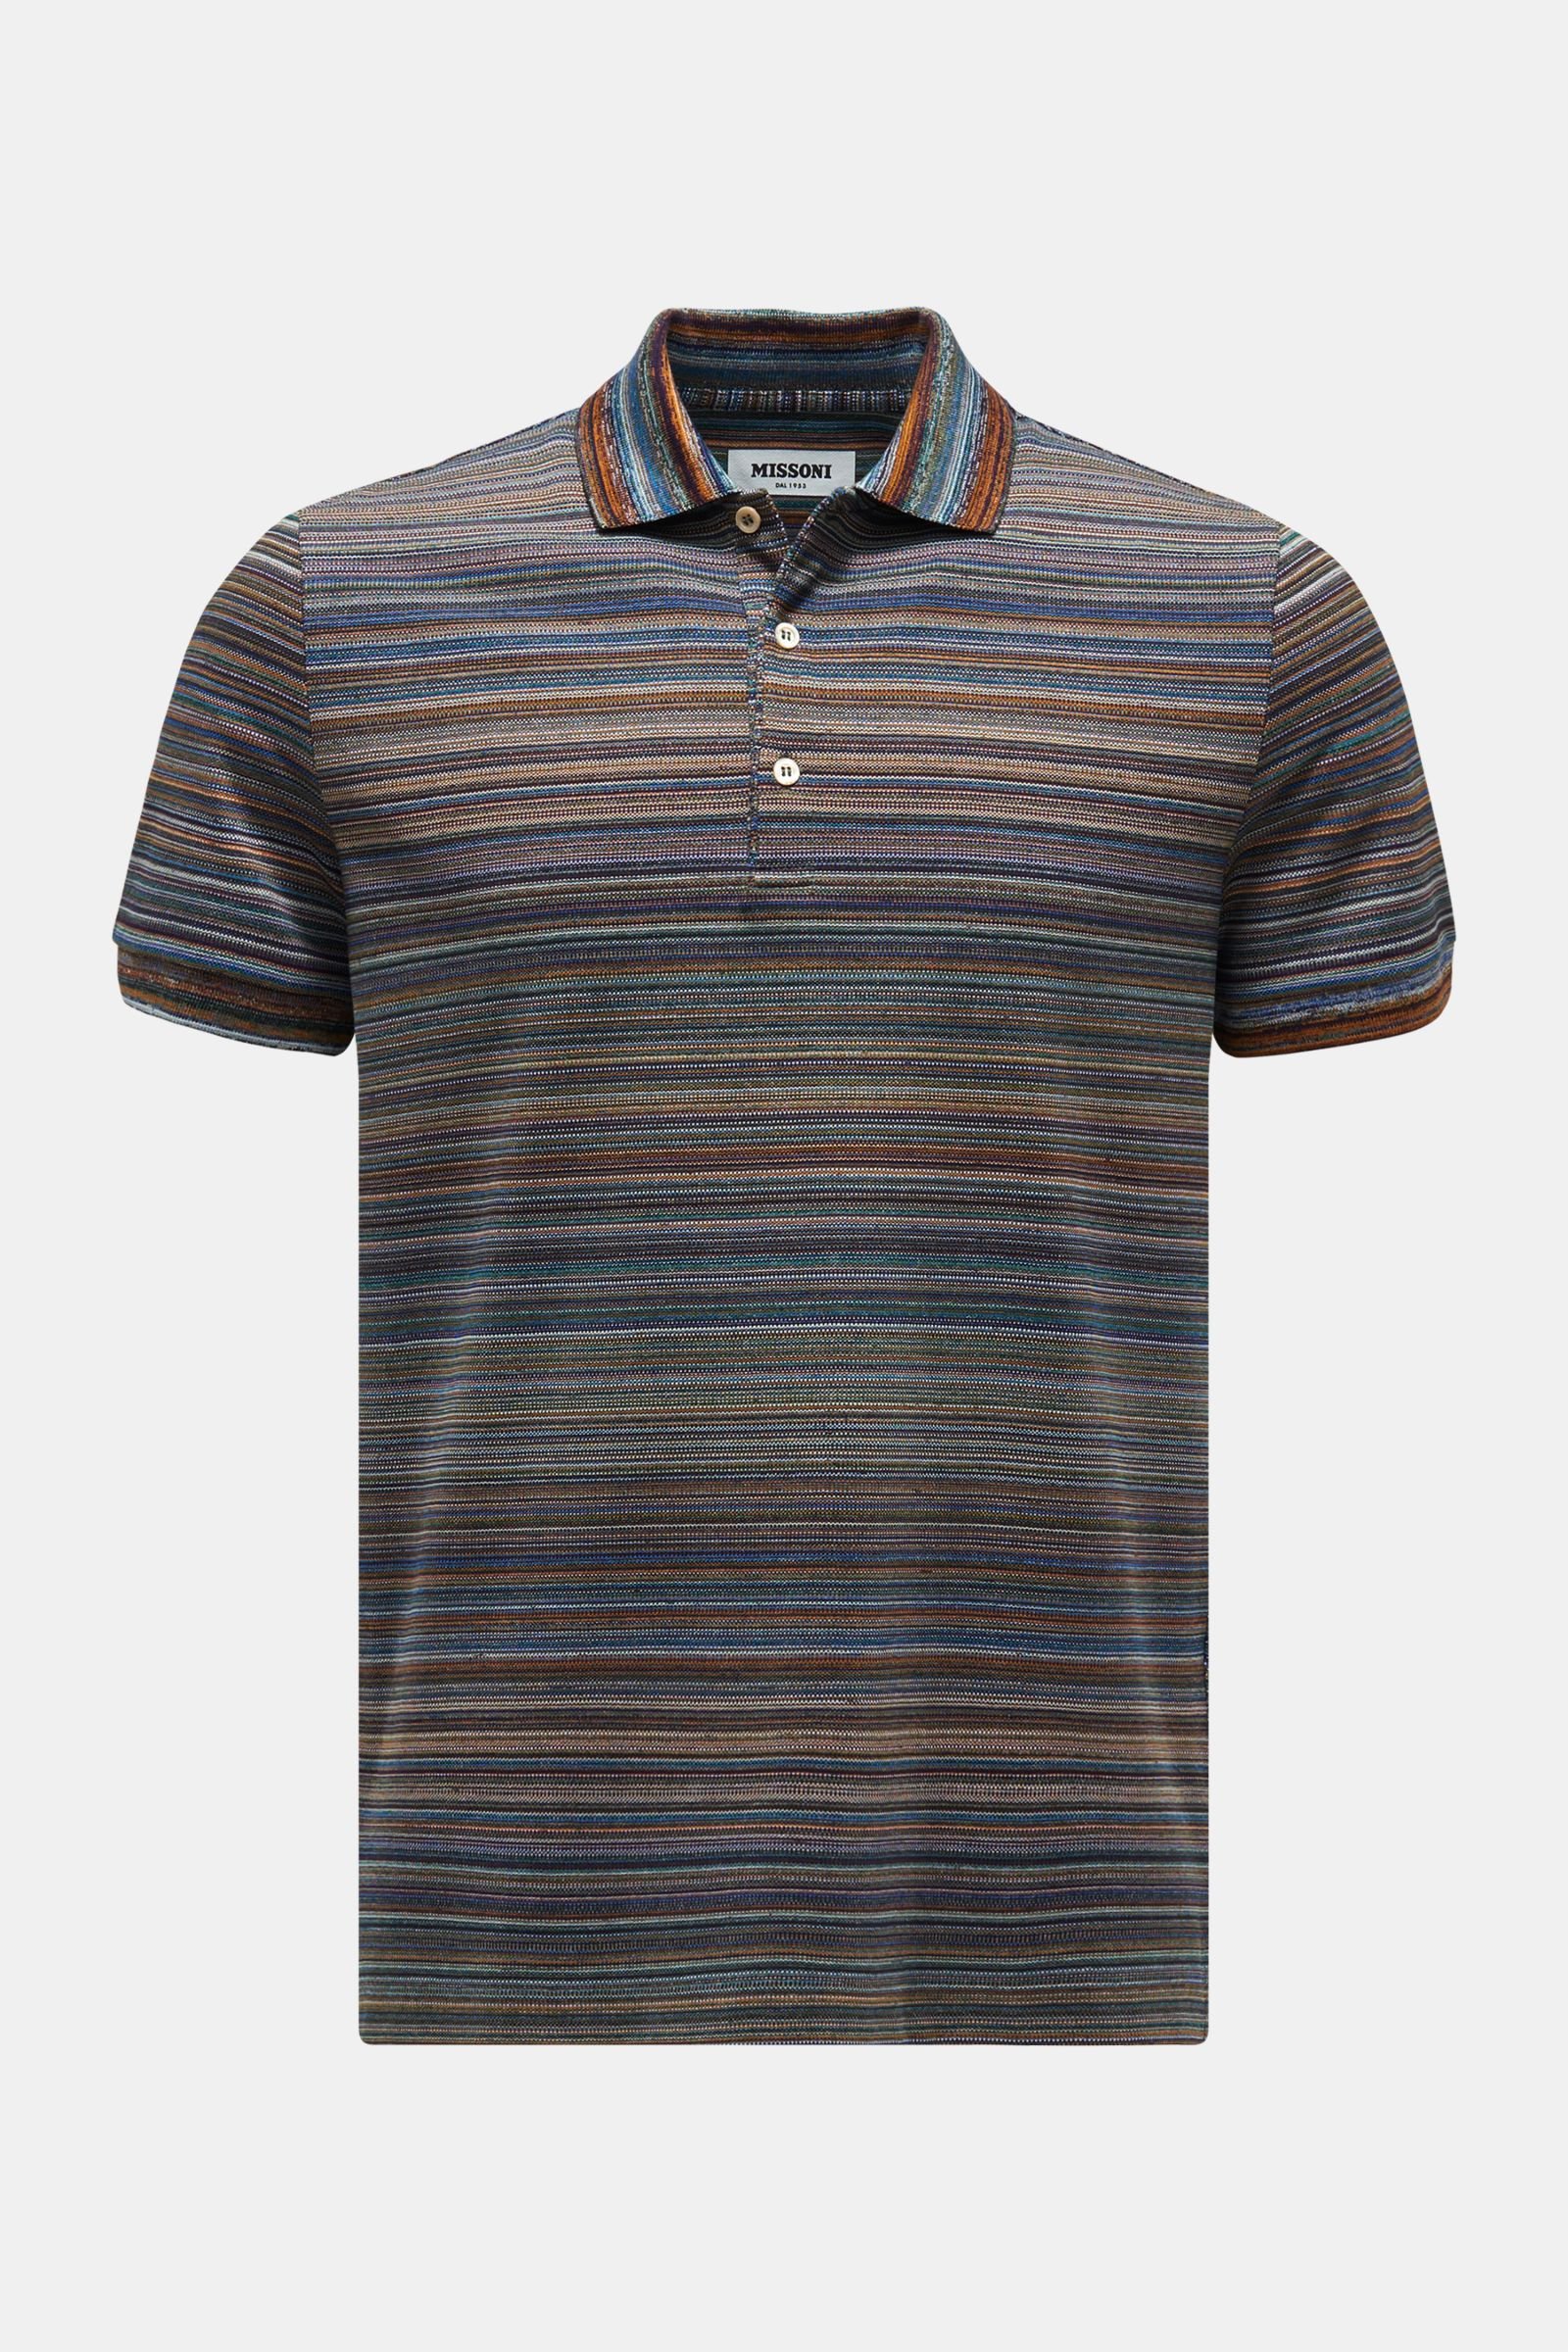 Short sleeve knit polo navy/light brown patterned